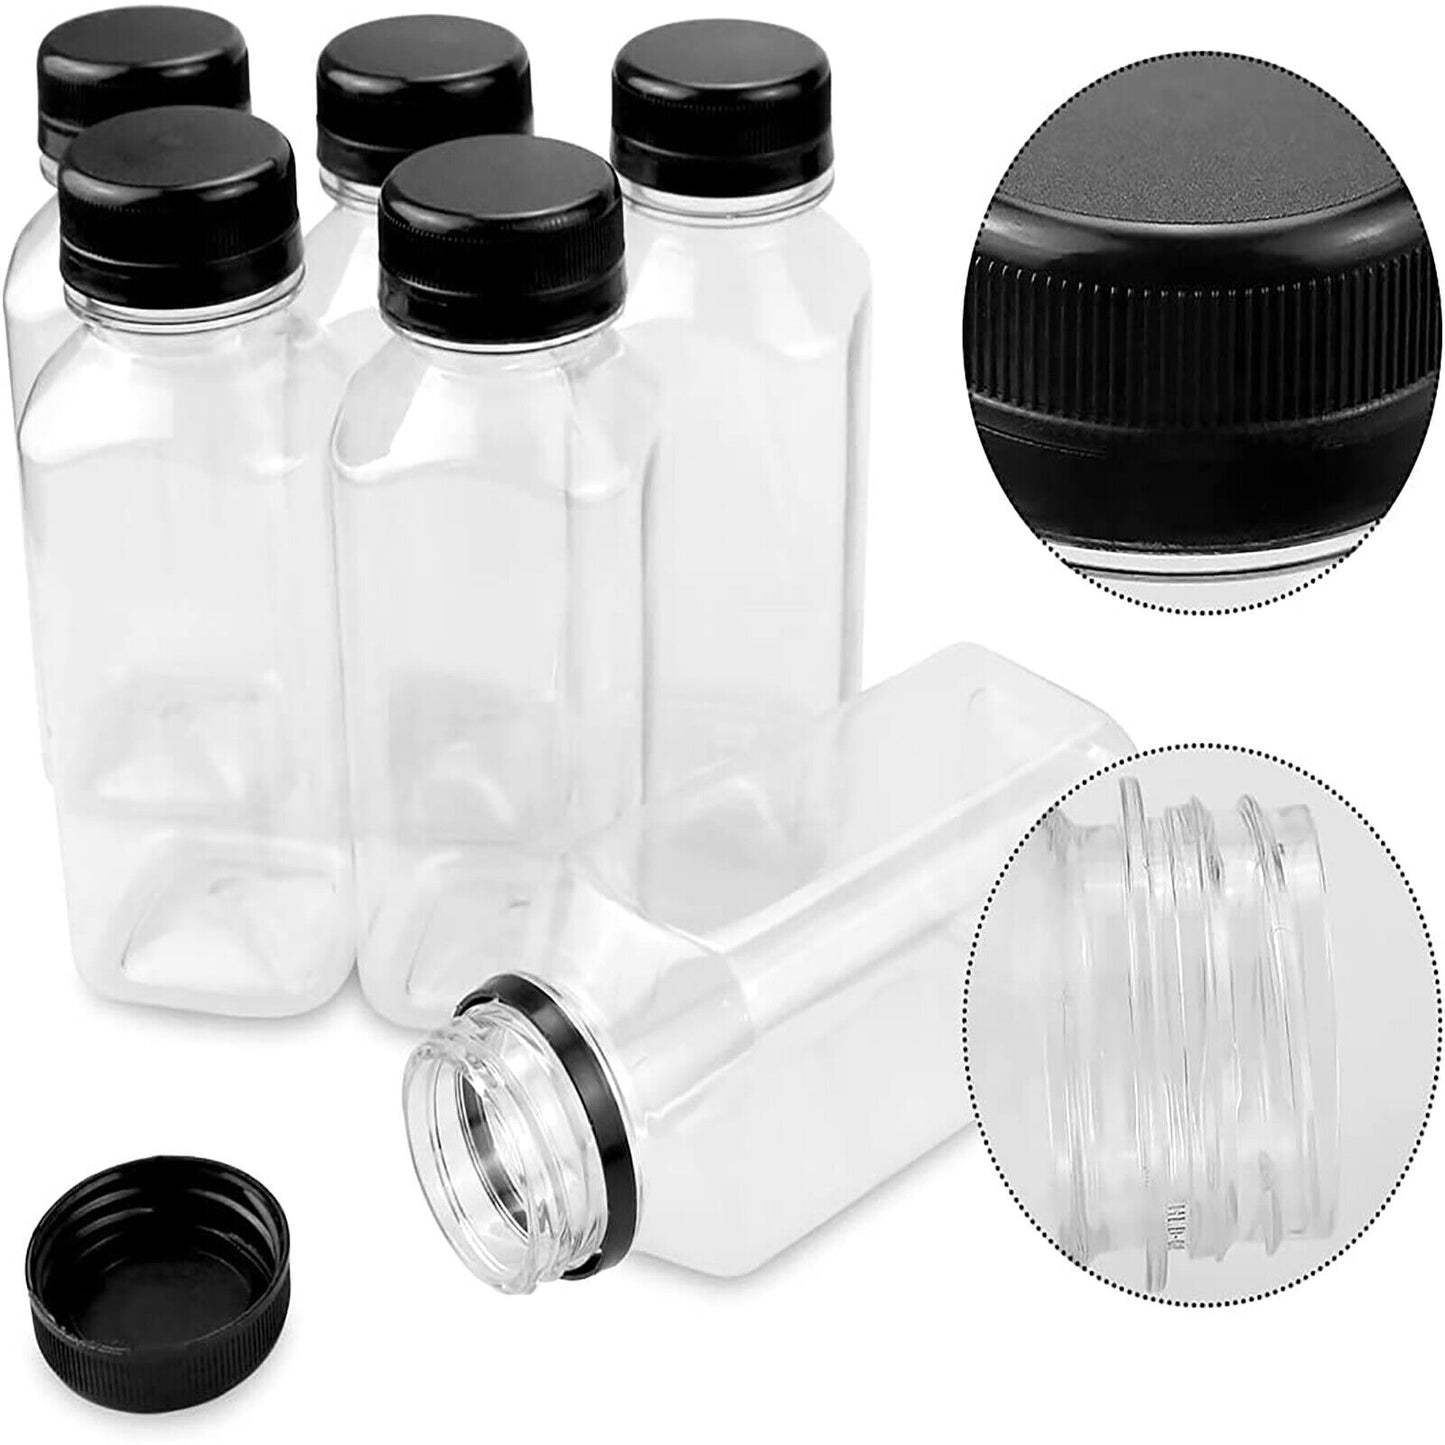 10/20/50X 250ml Square Clear Plastic Juice Bottles Refillable Empty Water Drink